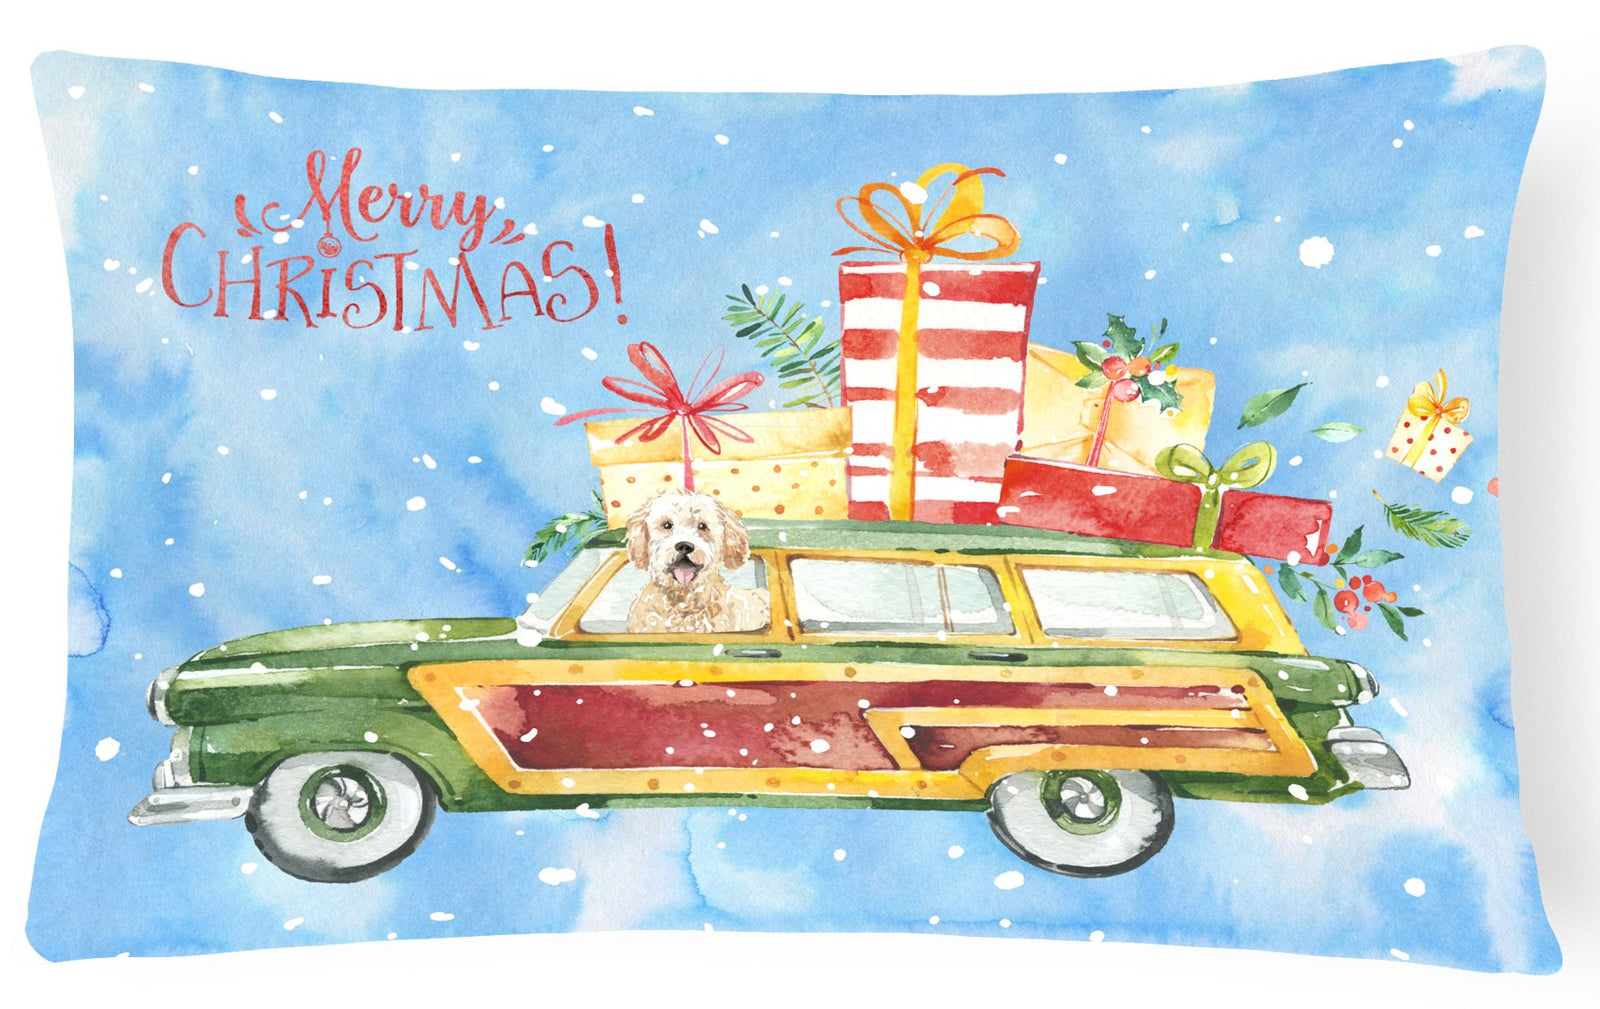 Merry Christmas Goldendoodle Canvas Fabric Decorative Pillow CK2406PW1216 by Caroline's Treasures